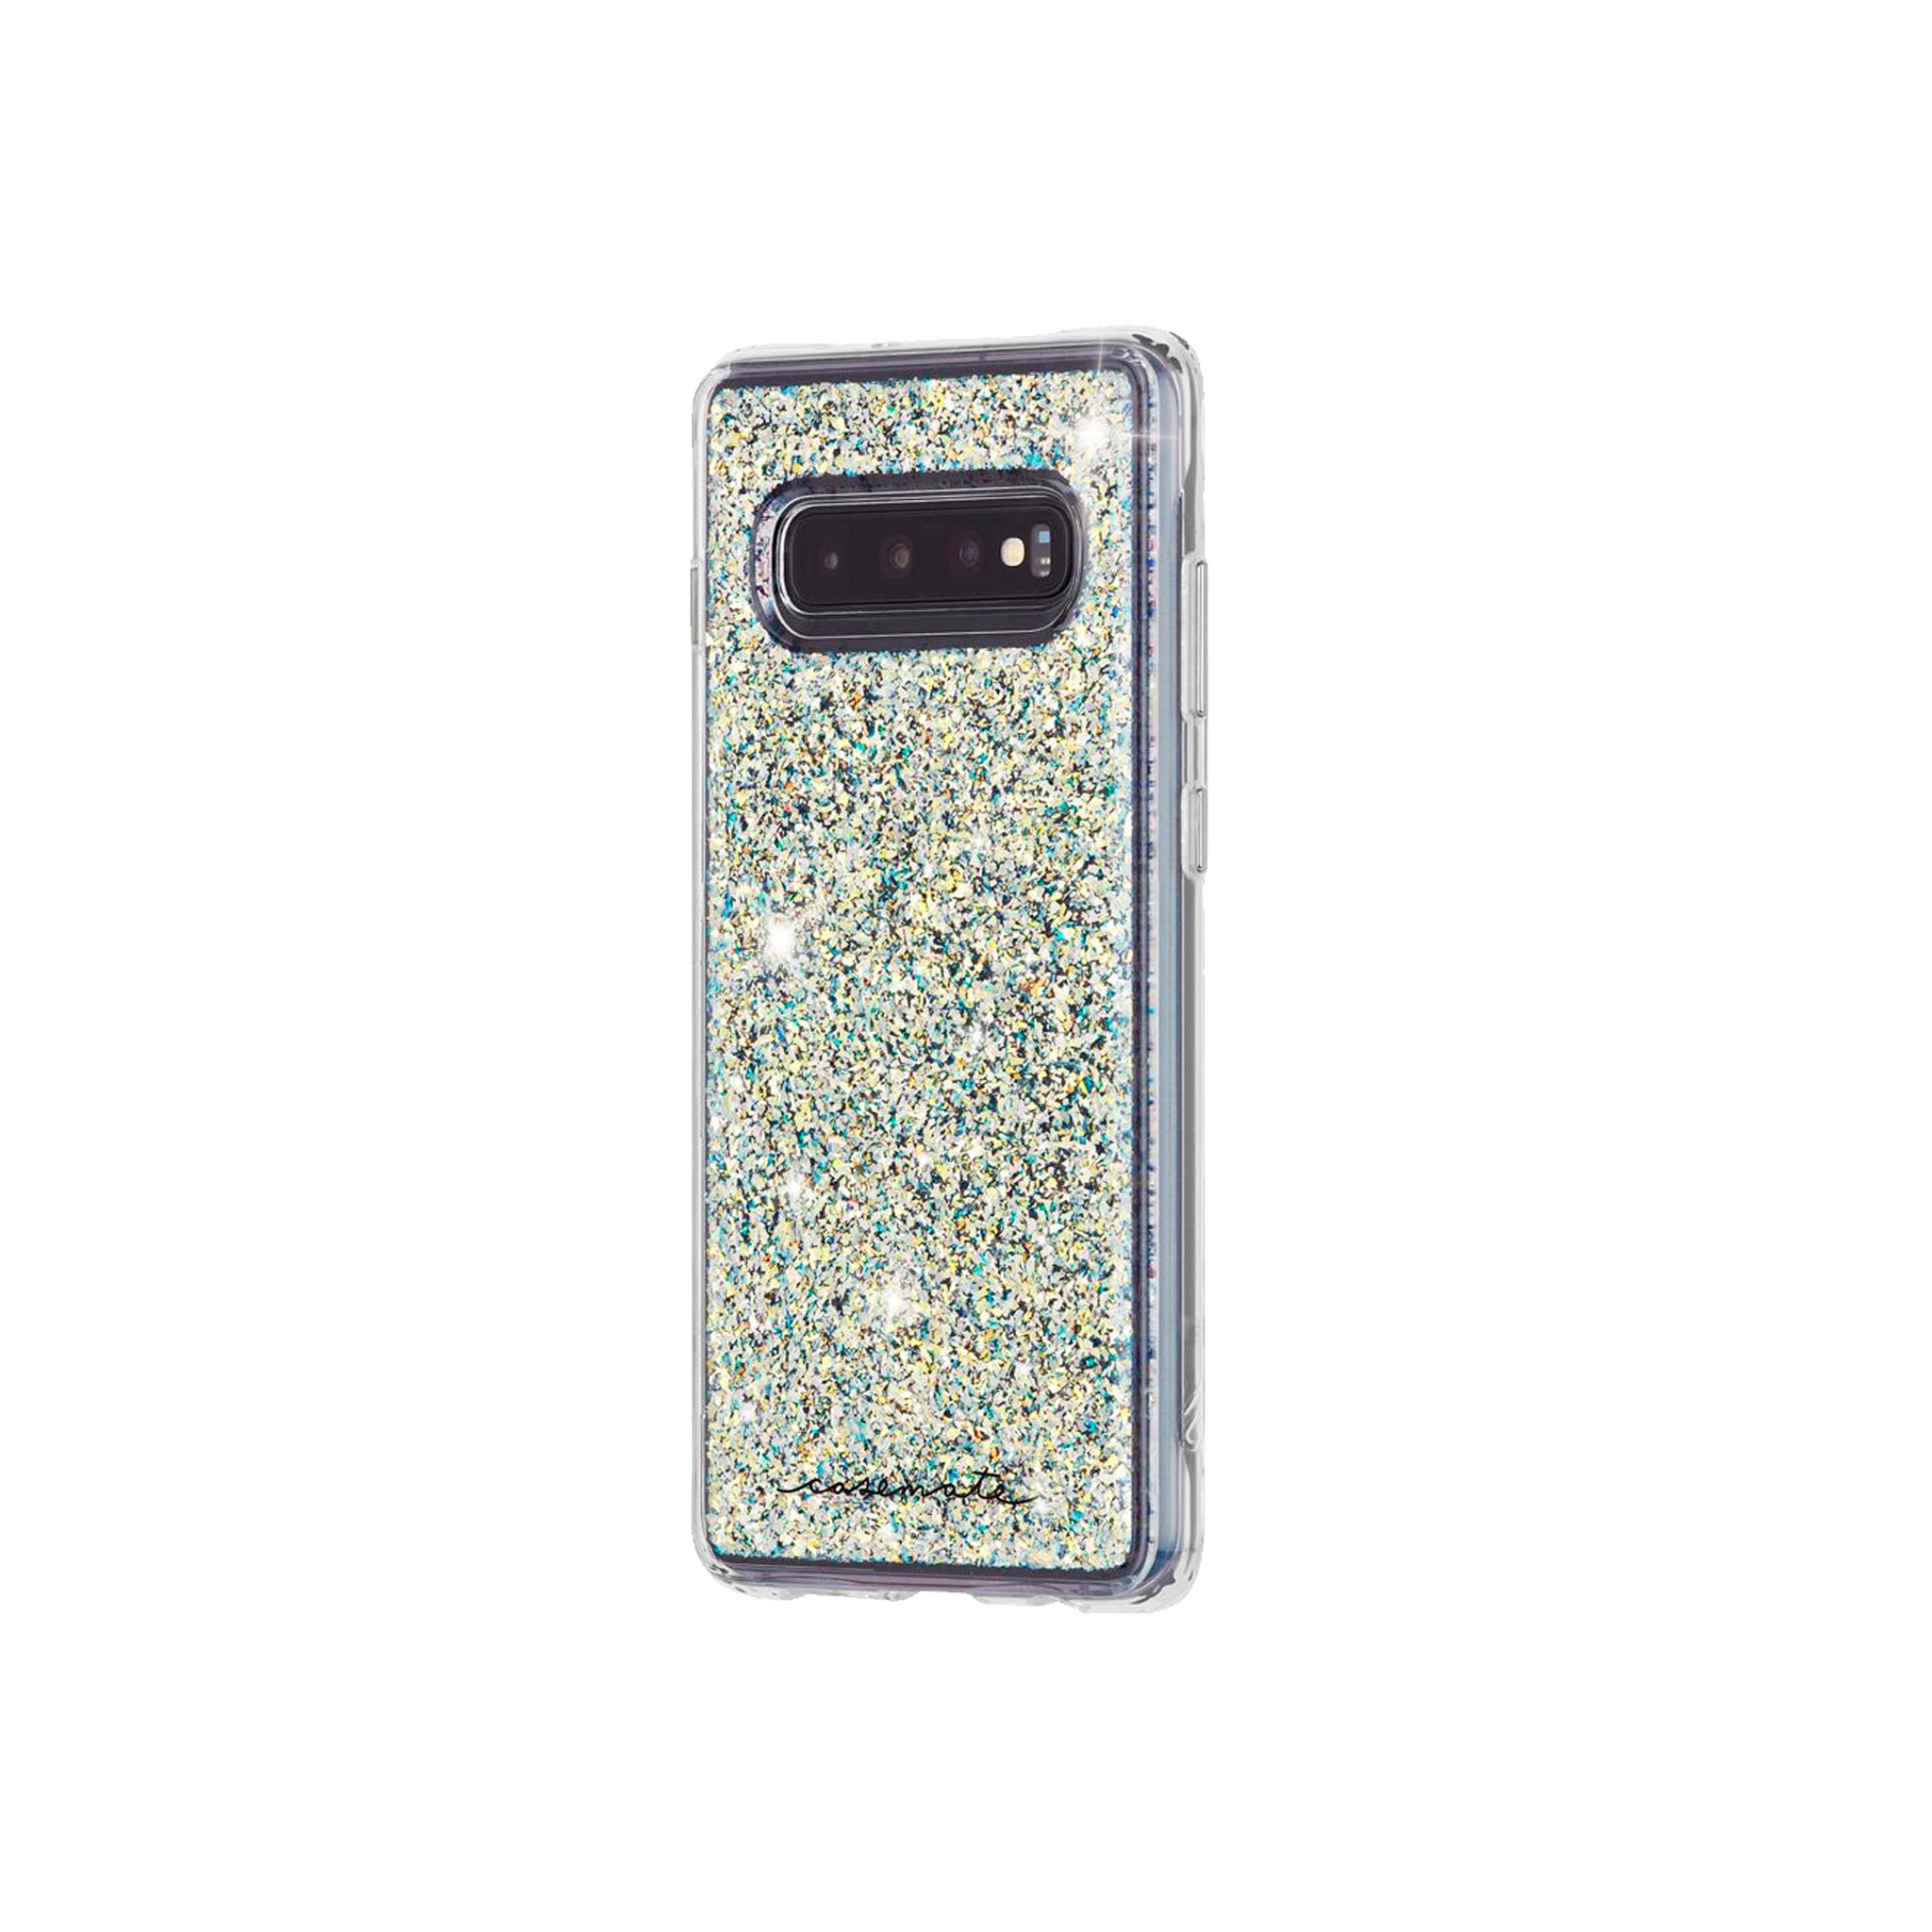 Case-mate - Twinkle Case For Samsung Galaxy S10 - Stardust